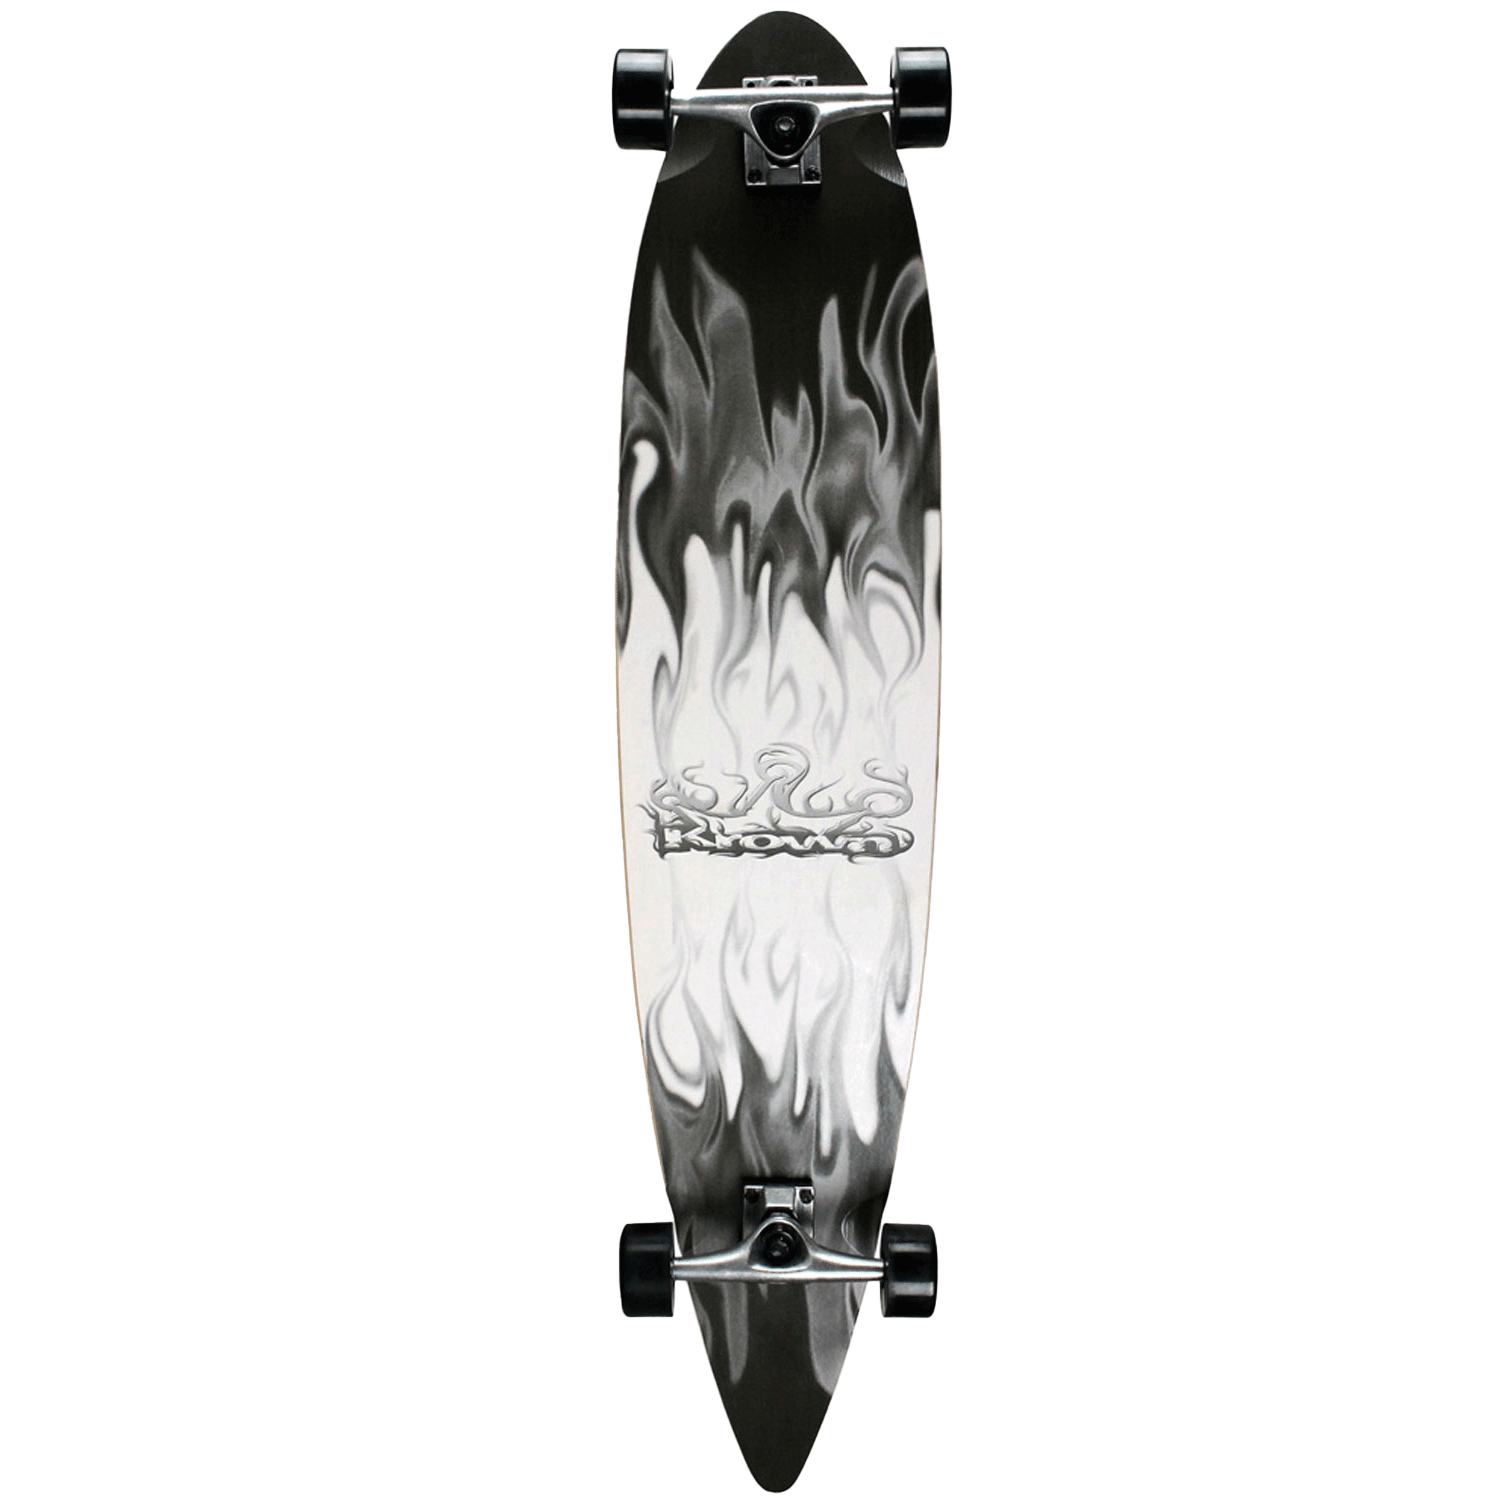 Krown Longboard Complete Pintail Grey/White Flame 9in x 43in